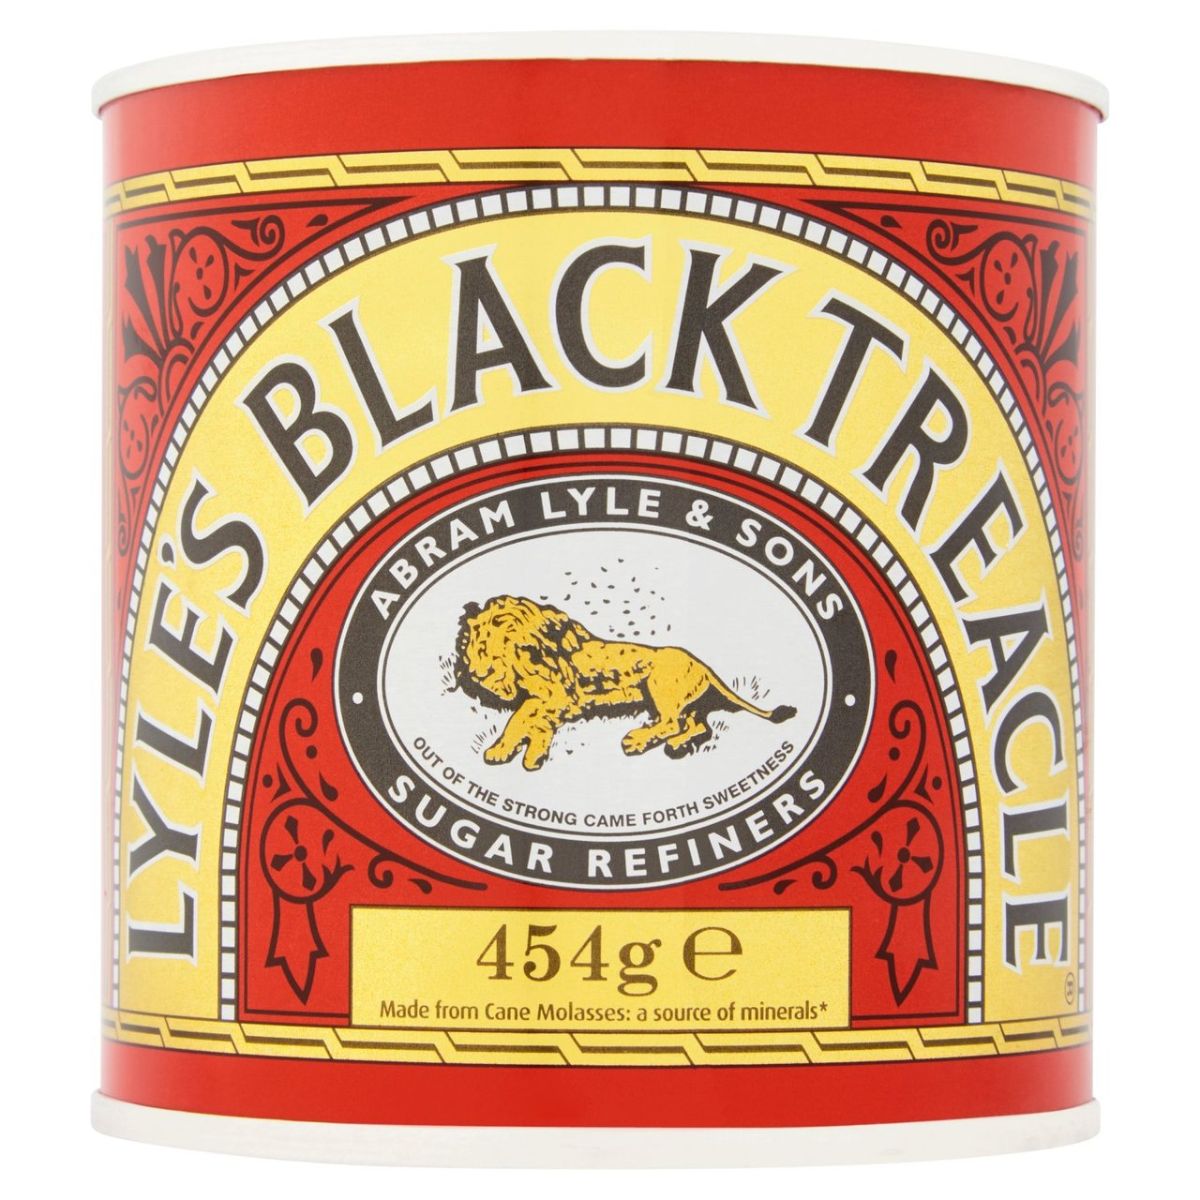 A tin of Lyle's - Black Treacle - 454g, a sugar refinement by-product used in baking and cooking.